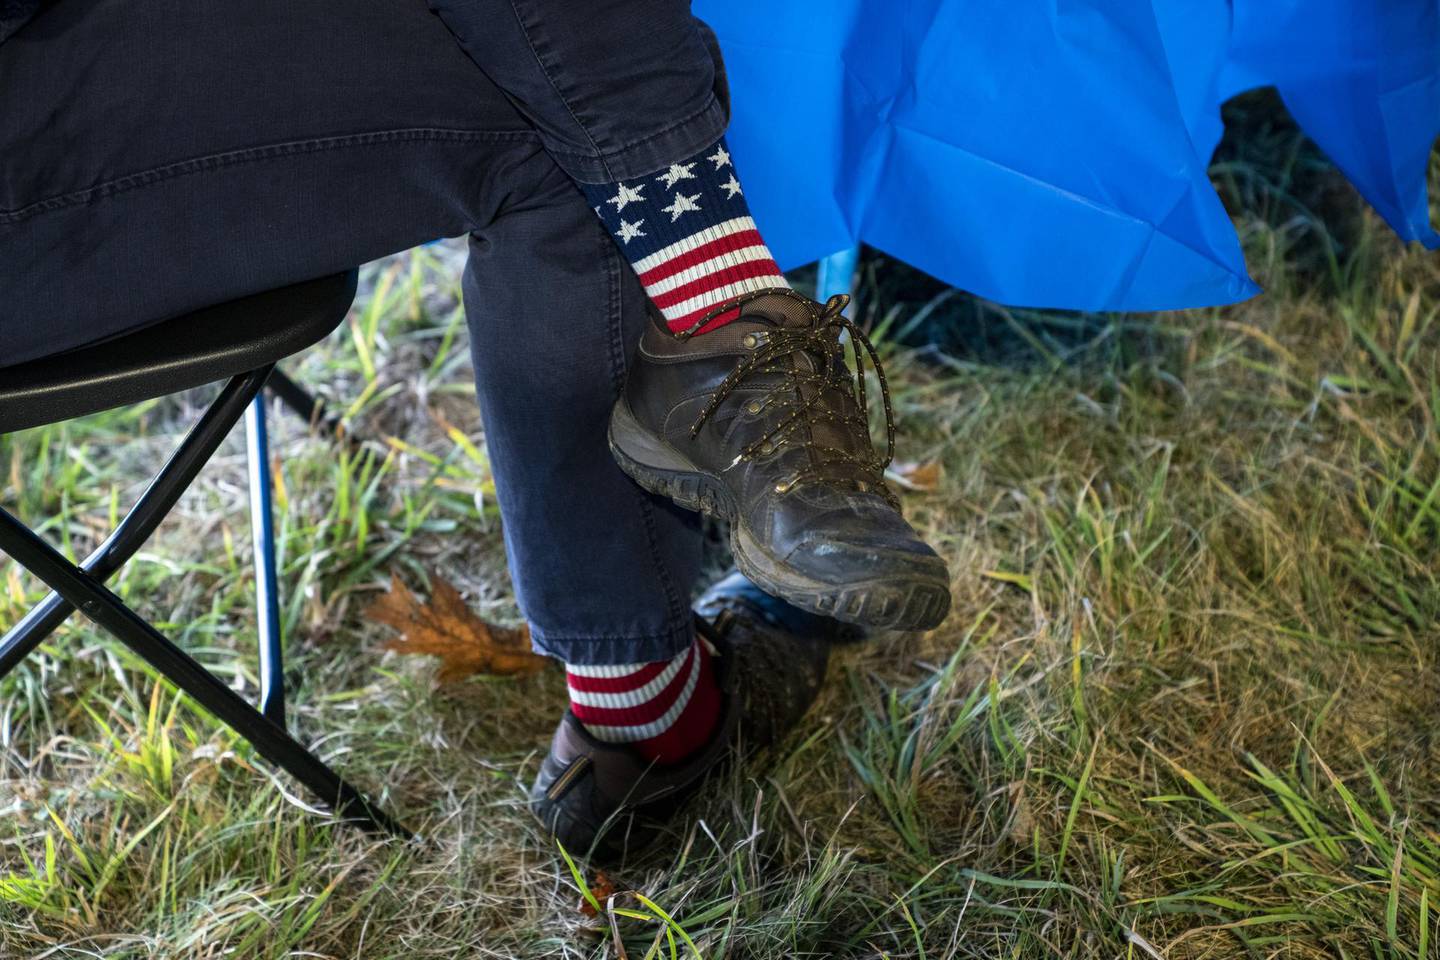 An attendee wears patriotic socks to a 'Supper with Sara' campaign event with U.S. Democratic Senate candidate Sara Gideon in Scarborough, Maine, U.S., on Tuesday, Oct. 20, 2020. The RealClearPolitics polling average shows Gideon with a 3.7 point lead over Republican Senator Susan Collins, who has represented Maine in the Senate since 1997. Photographer: Sarah Rice/Bloomberg